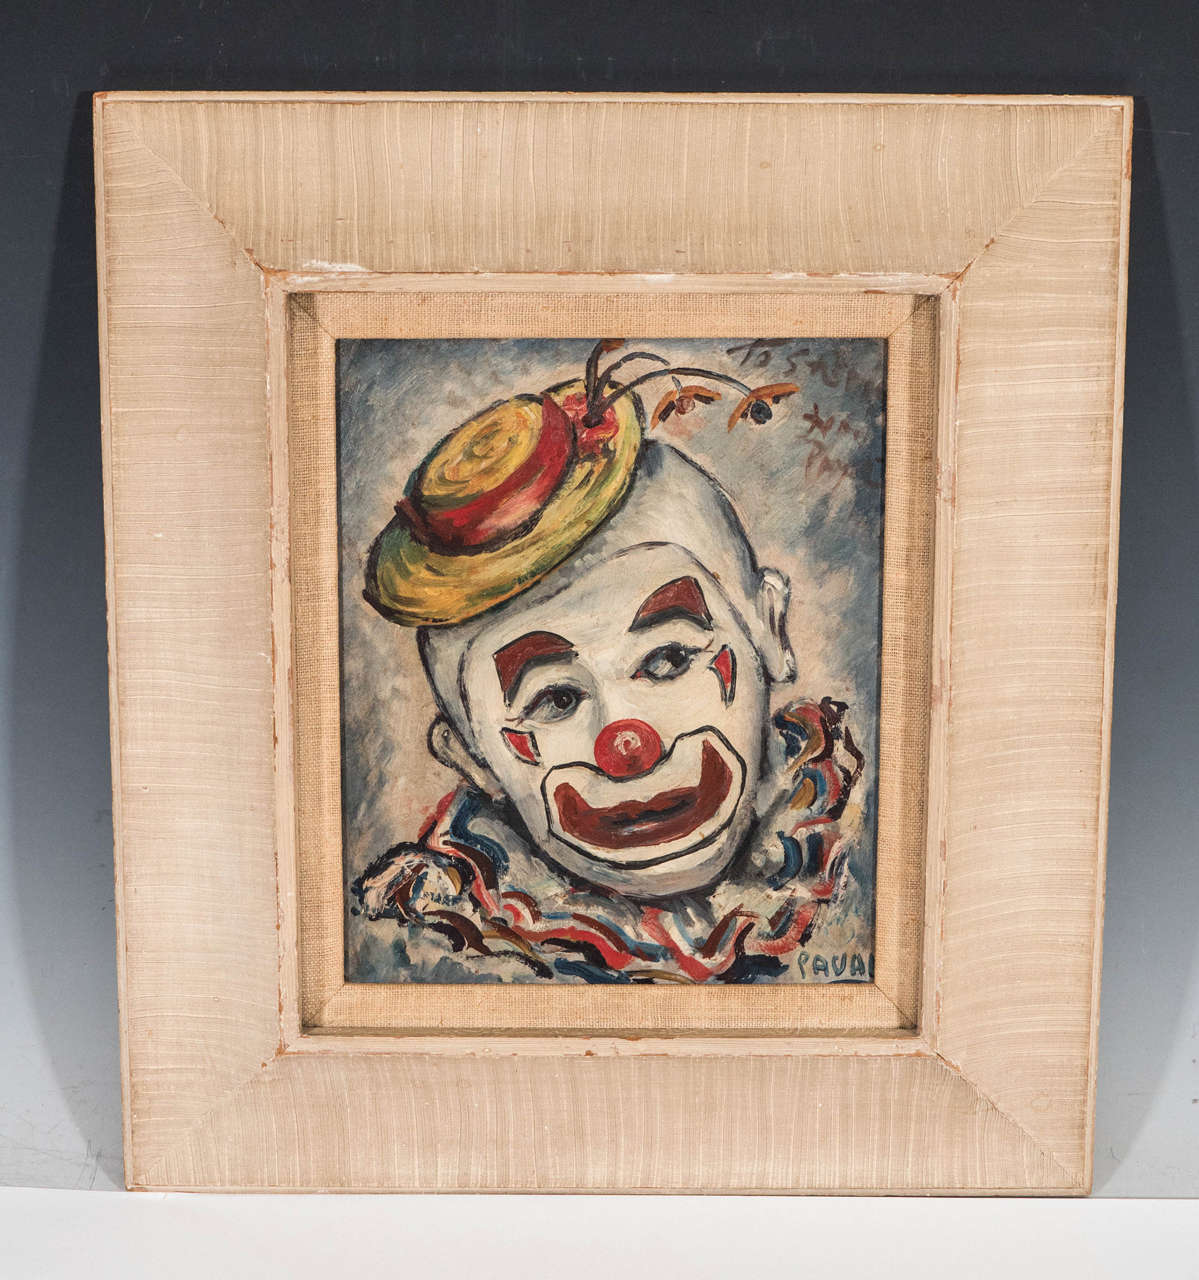 A vintage oil on canvas of a sad clown by artist Philip Kran Paval. Signed and dated 1951. 

Paval was born in Denmark. He immigrated to America in 1919. During the 1920s he moved to Los Angeles where he established a silversmith shop. Paval